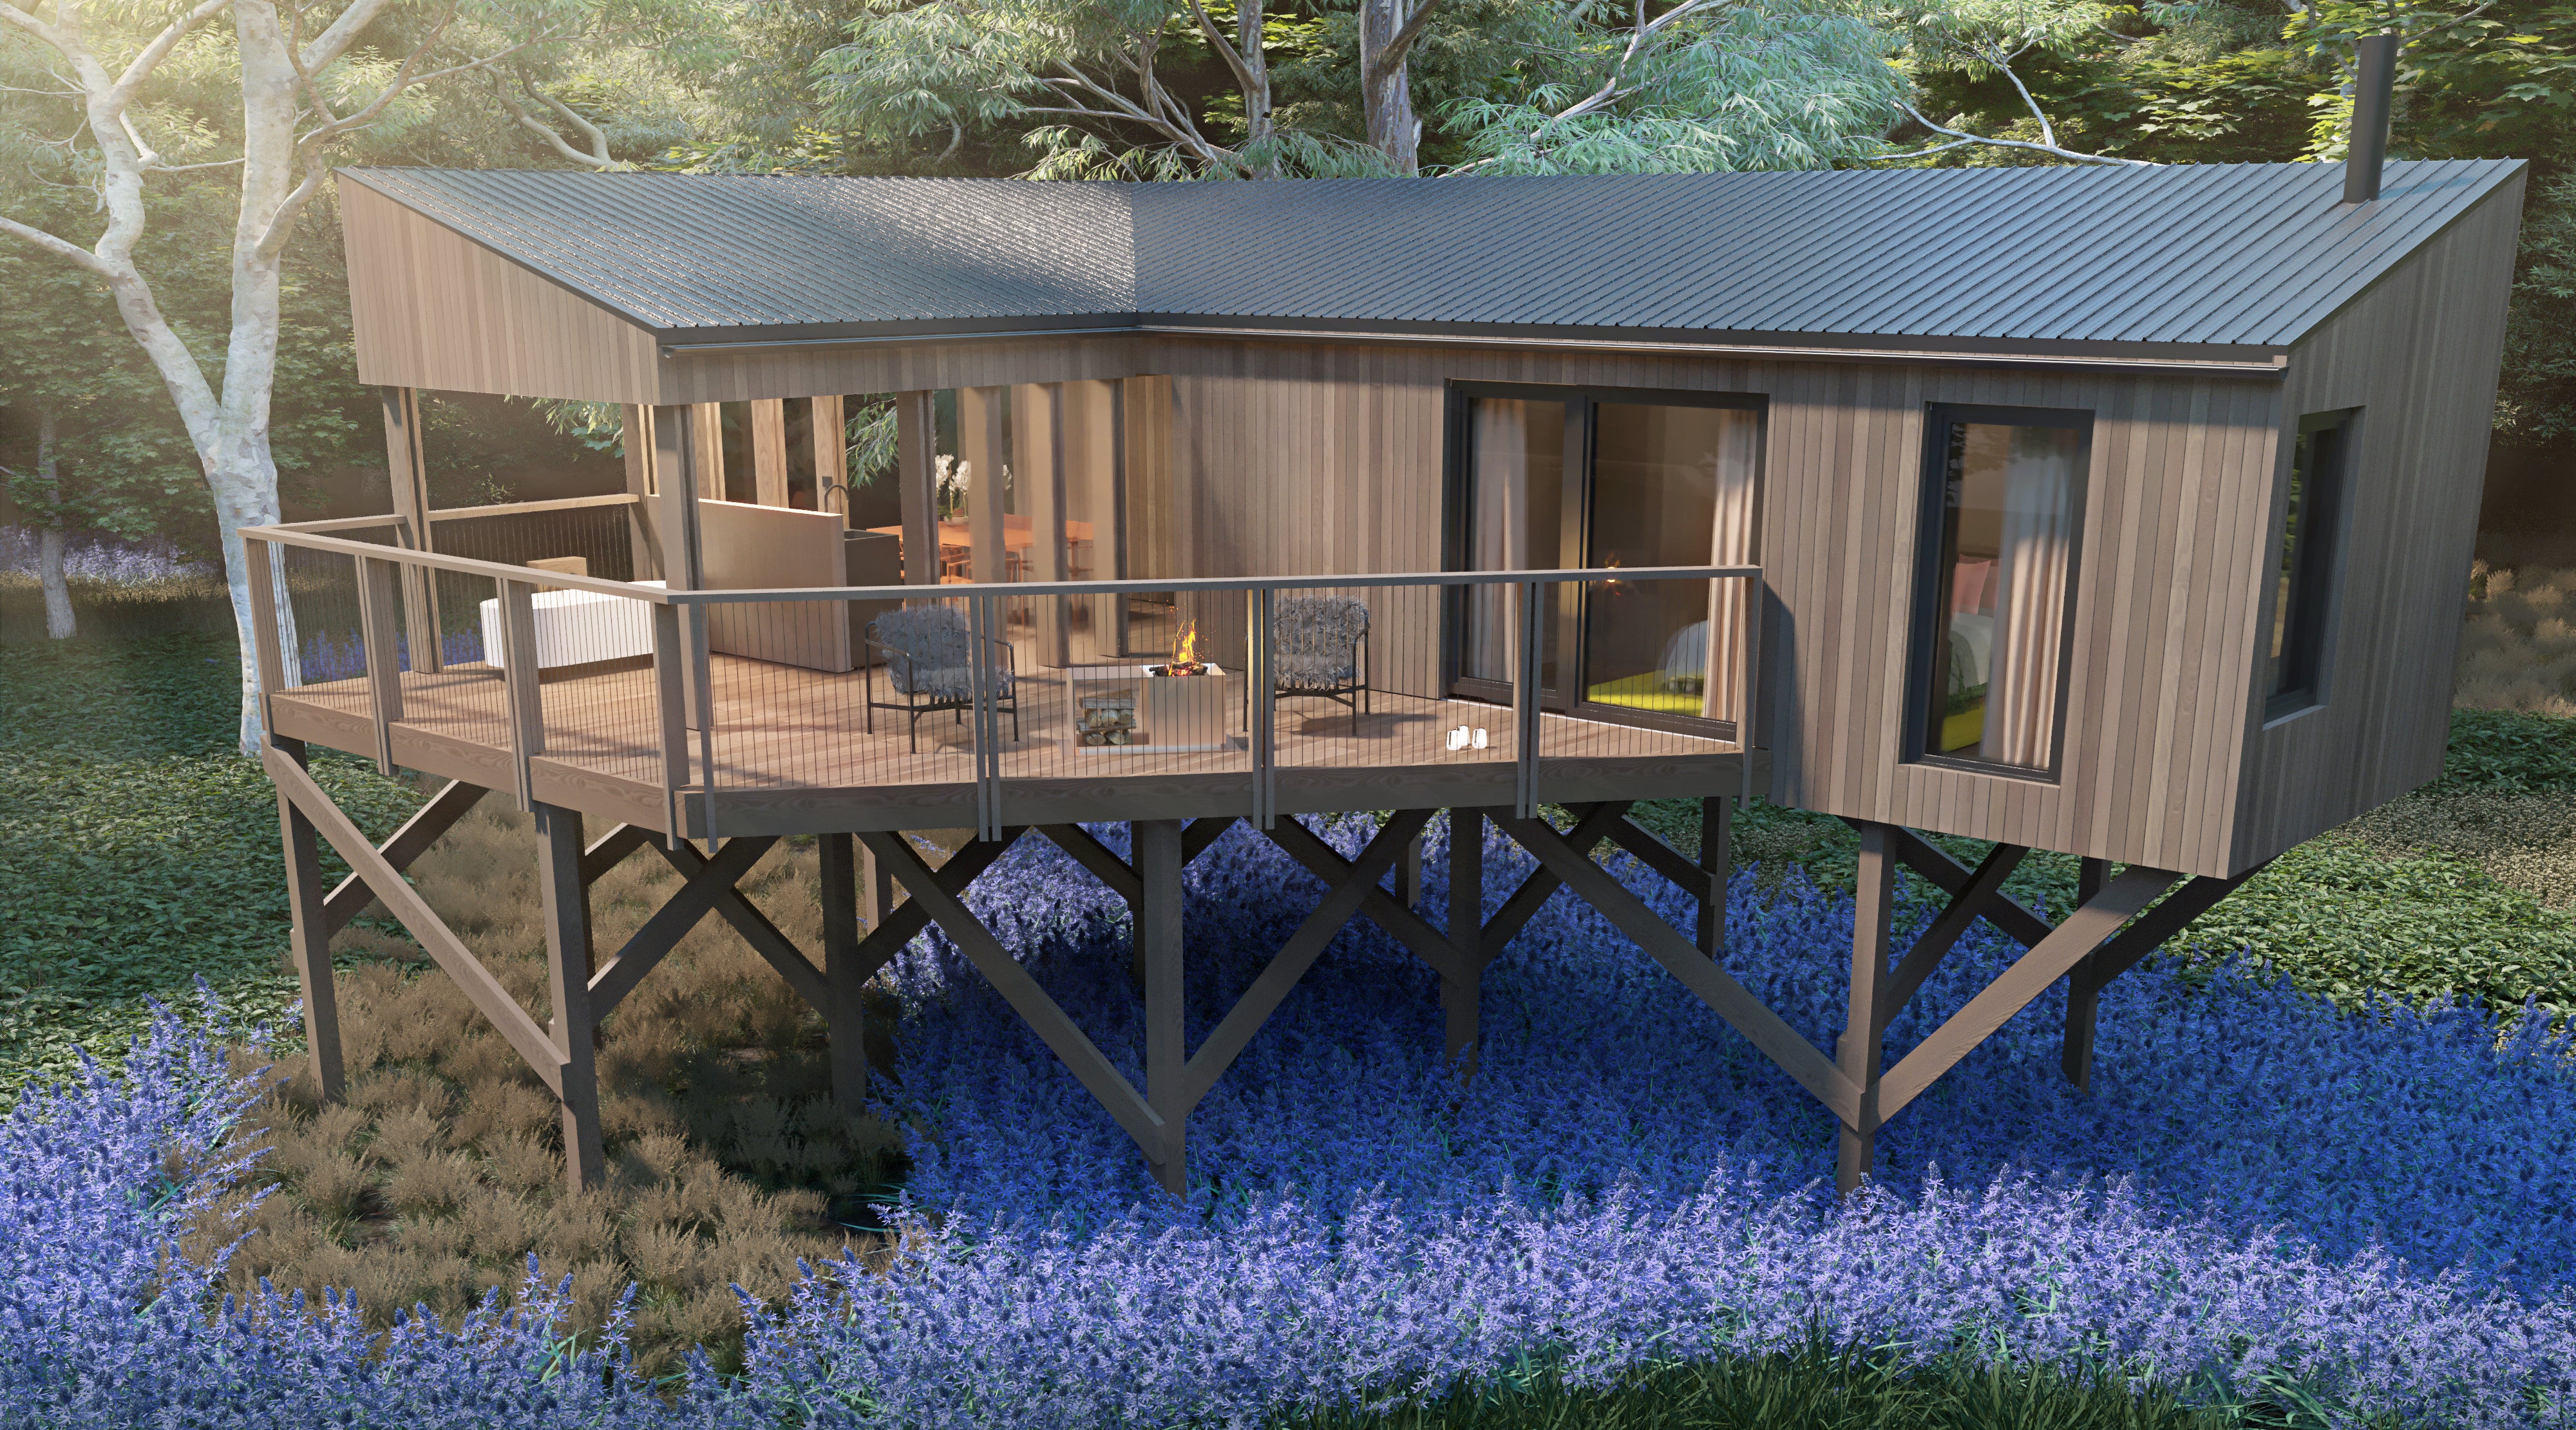 Elmore Court’s treehouses are launching in May